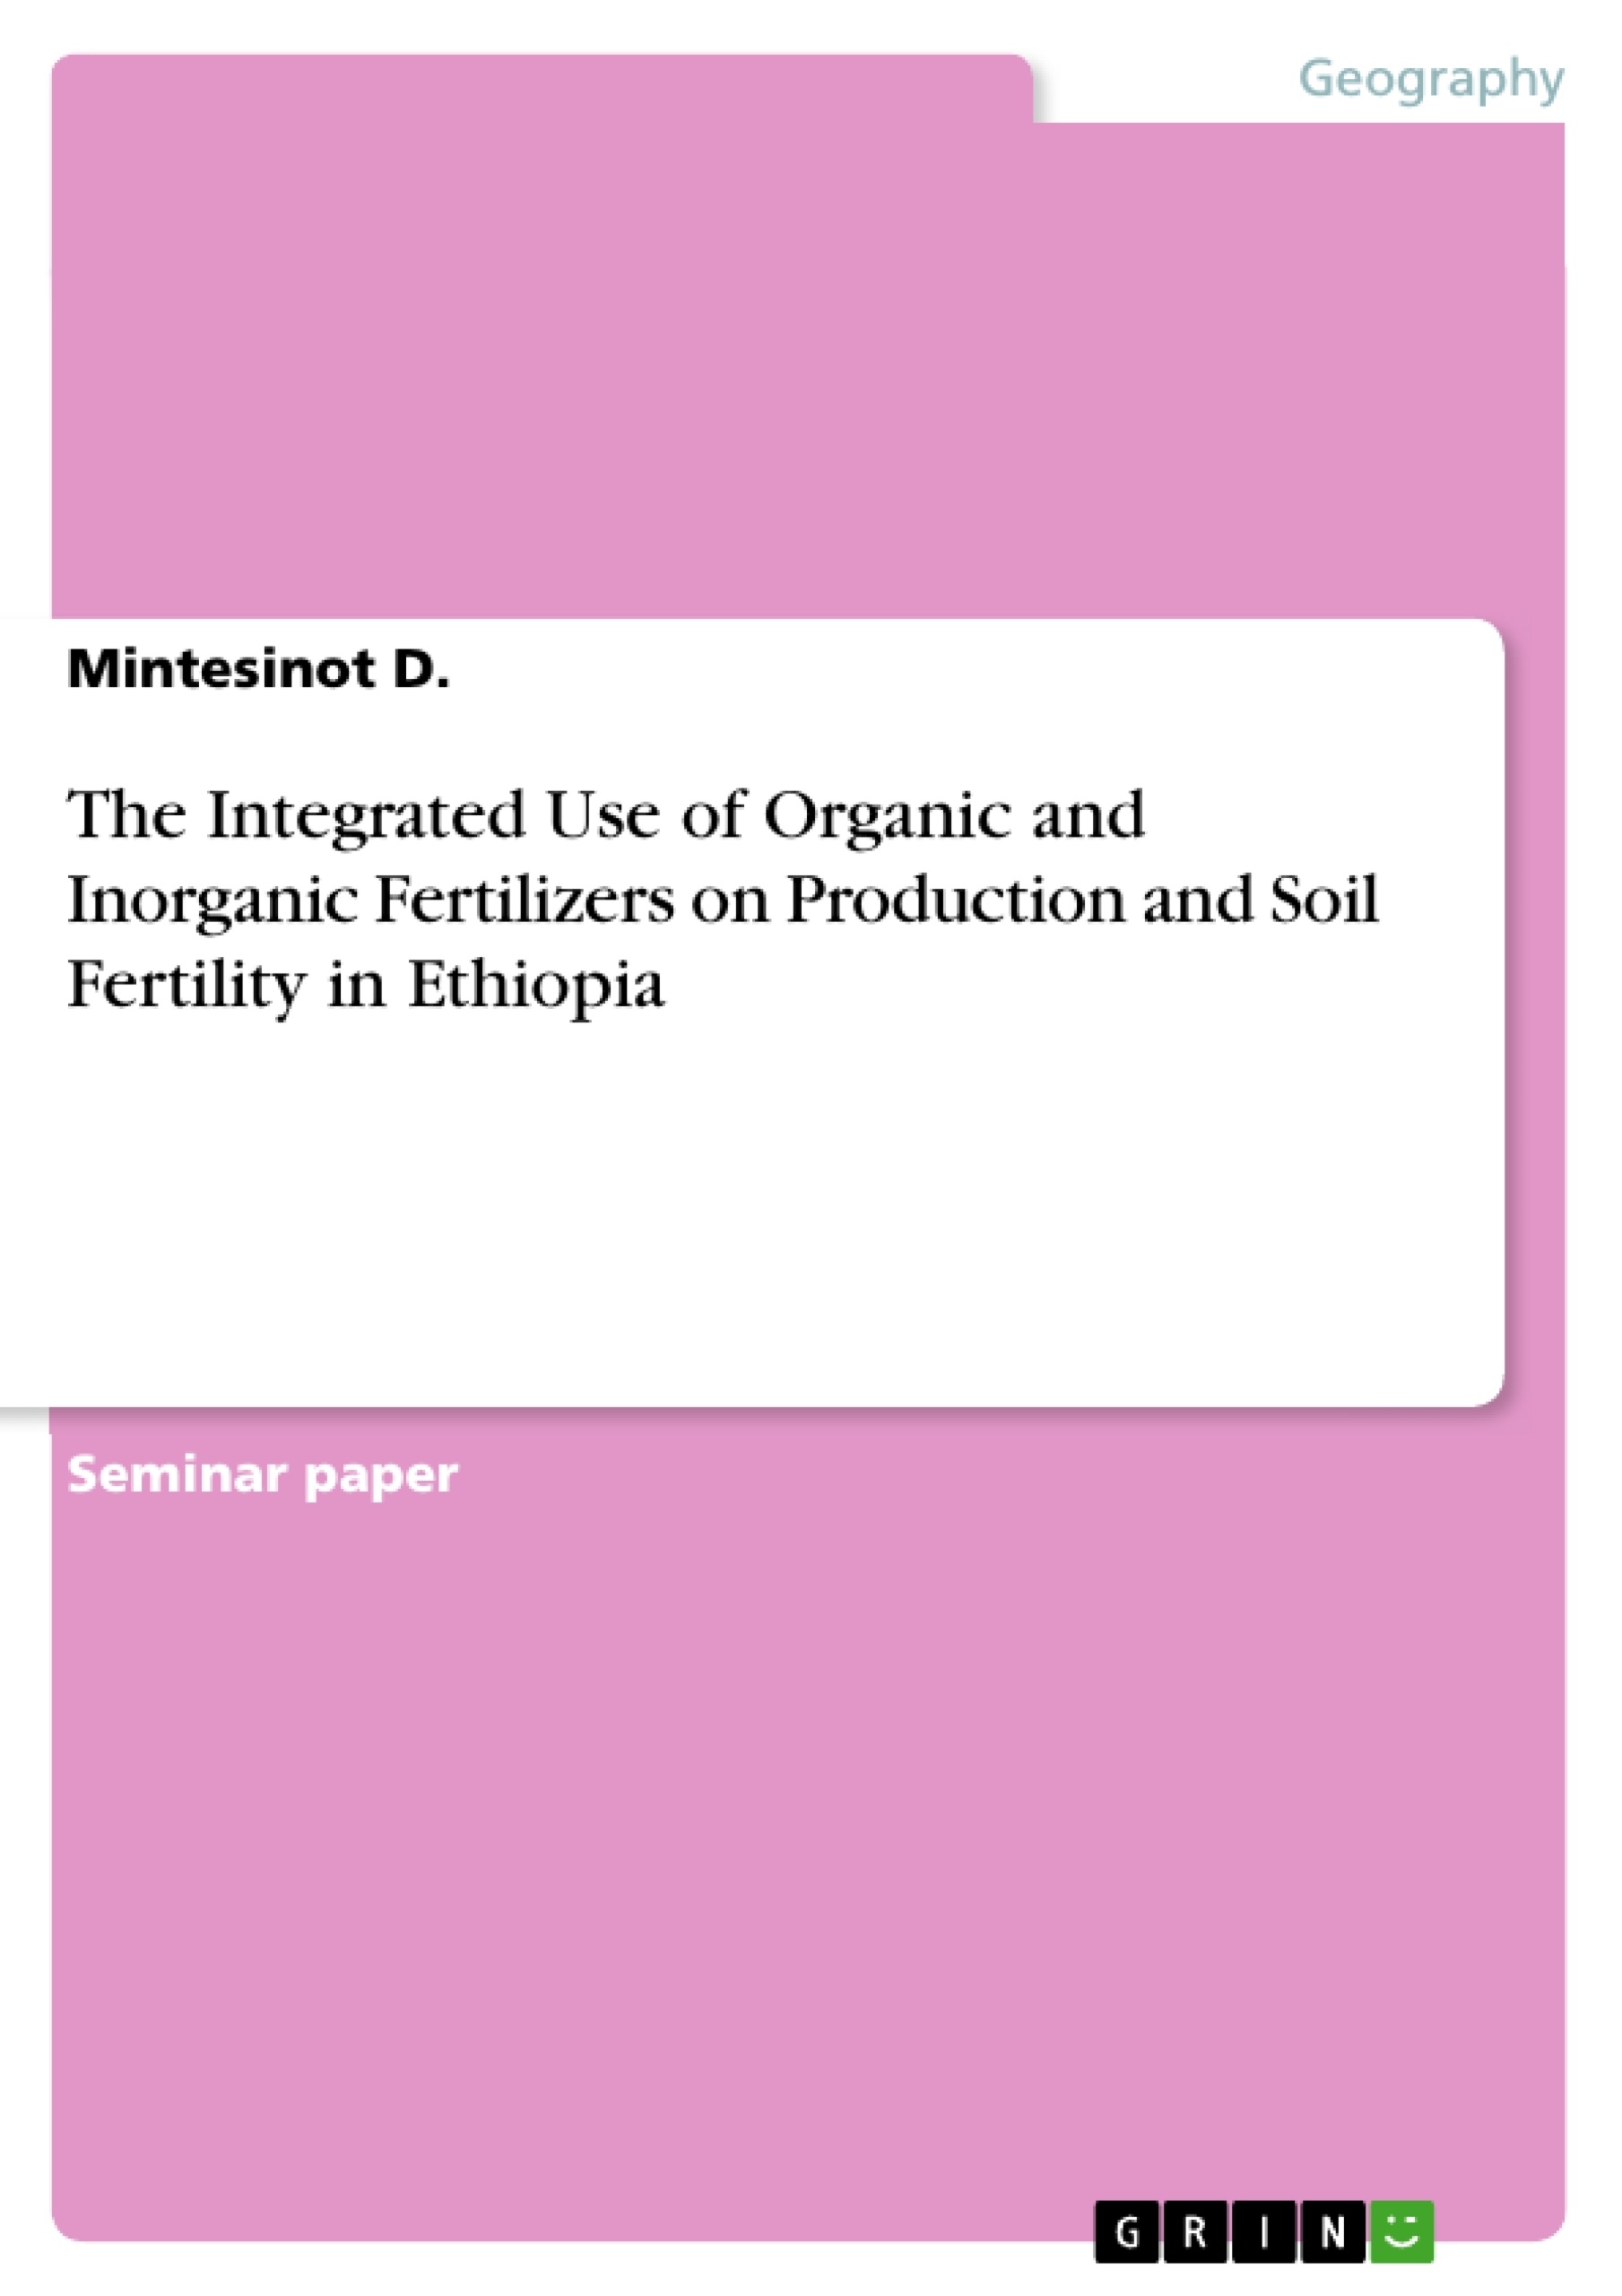 Titre: The Integrated Use of Organic and Inorganic Fertilizers on Production and Soil Fertility in Ethiopia